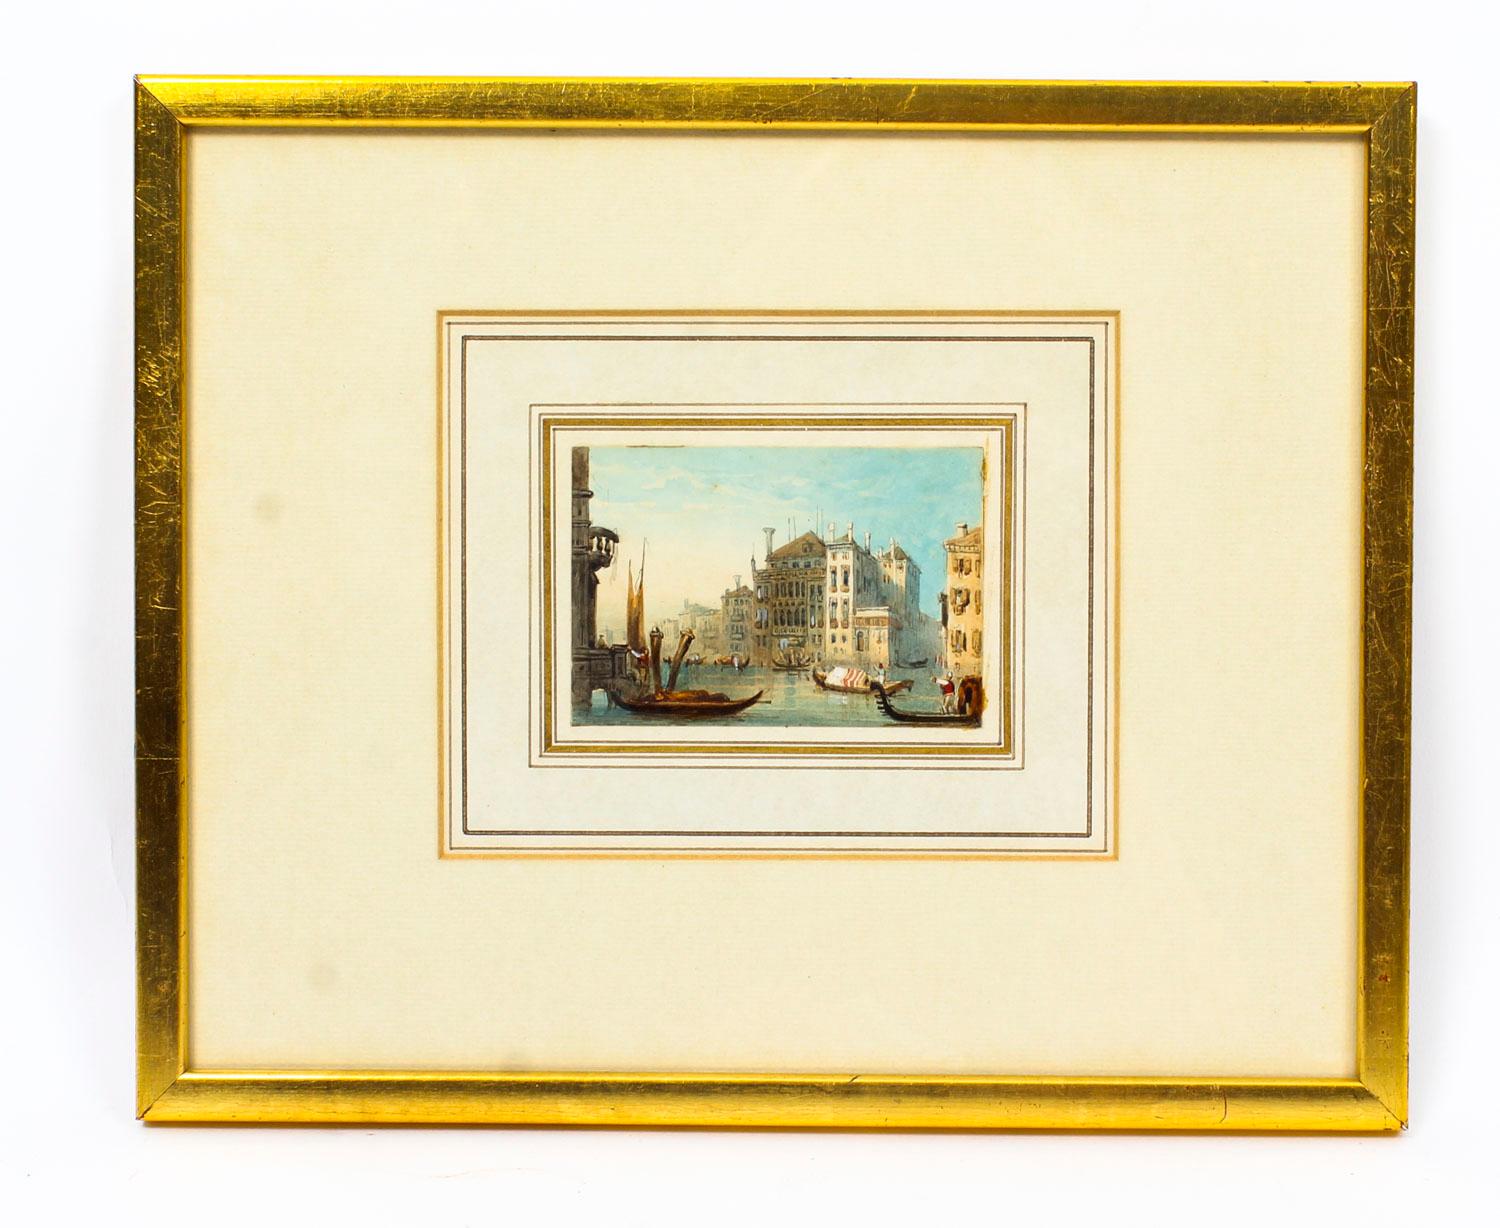 This beautiful pair of miniature antique watercolors by Samuel Prout (1783–1852) date from circa 1820.

They depict the period view down the Piazza San MarCo of the Grand Canal, the Marciana Library and the Doge's Palace, with the Columns of San